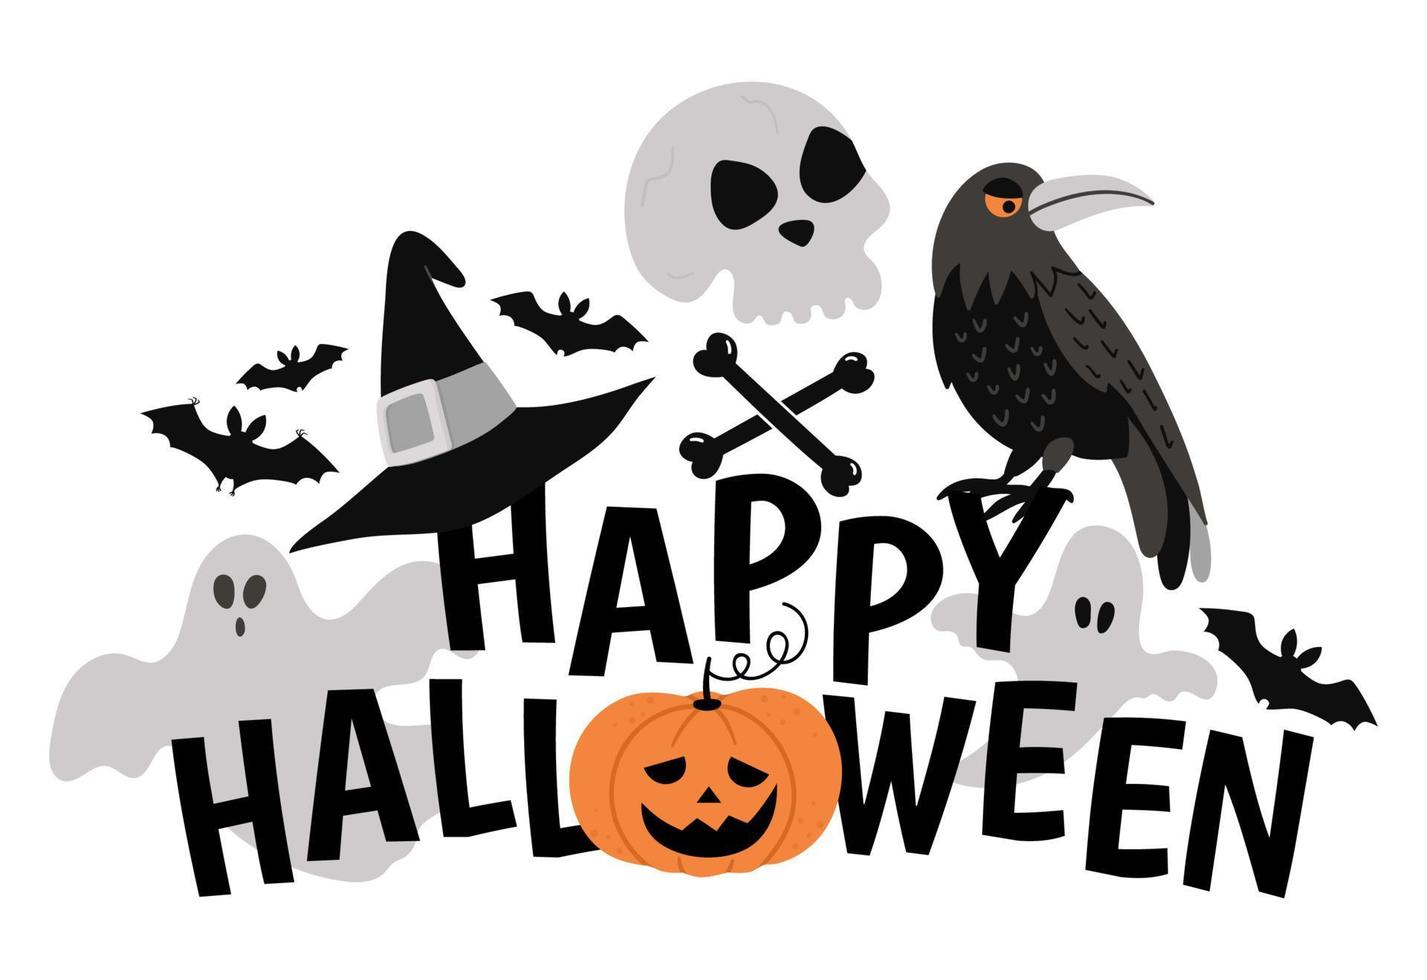 Vector Halloween composition with text, ghost, raven, scull, witch hat, bats. Funny autumn holiday background design for banners, posters, invitations. Card template with scary elements